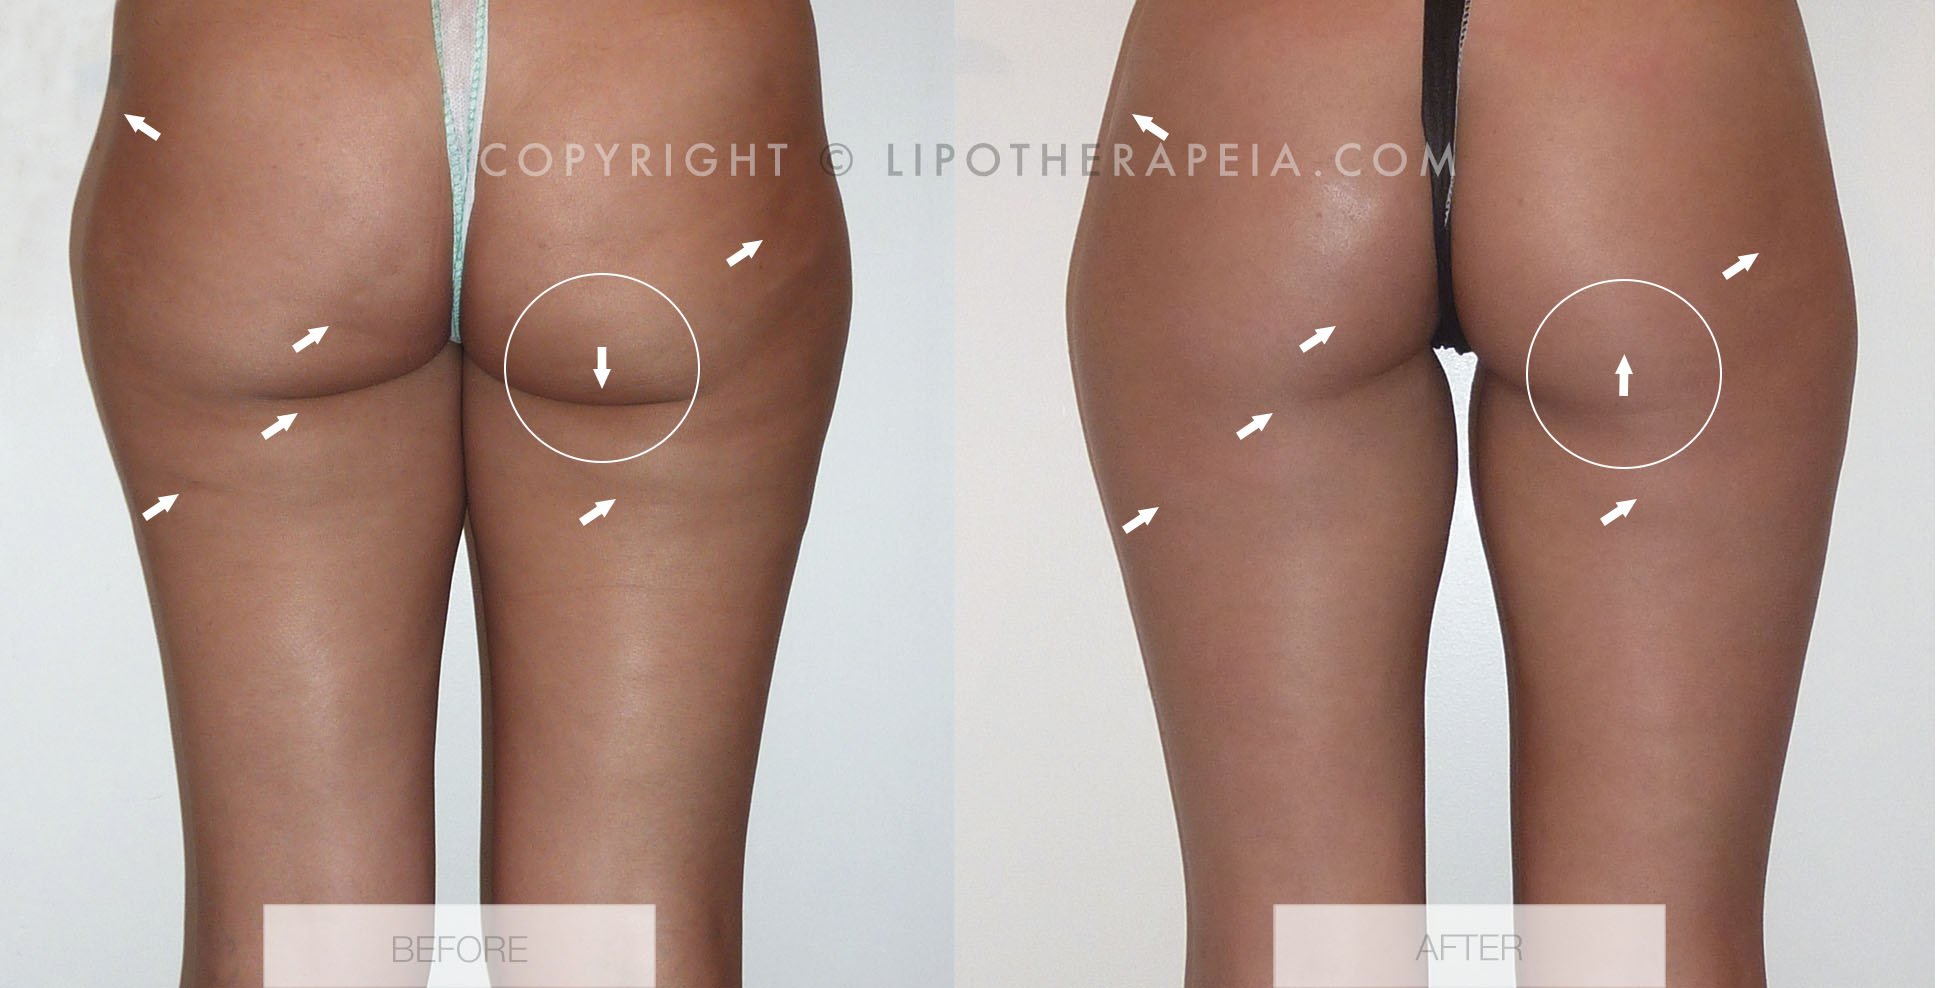 9x REAL cellulite treatment before and after pictures